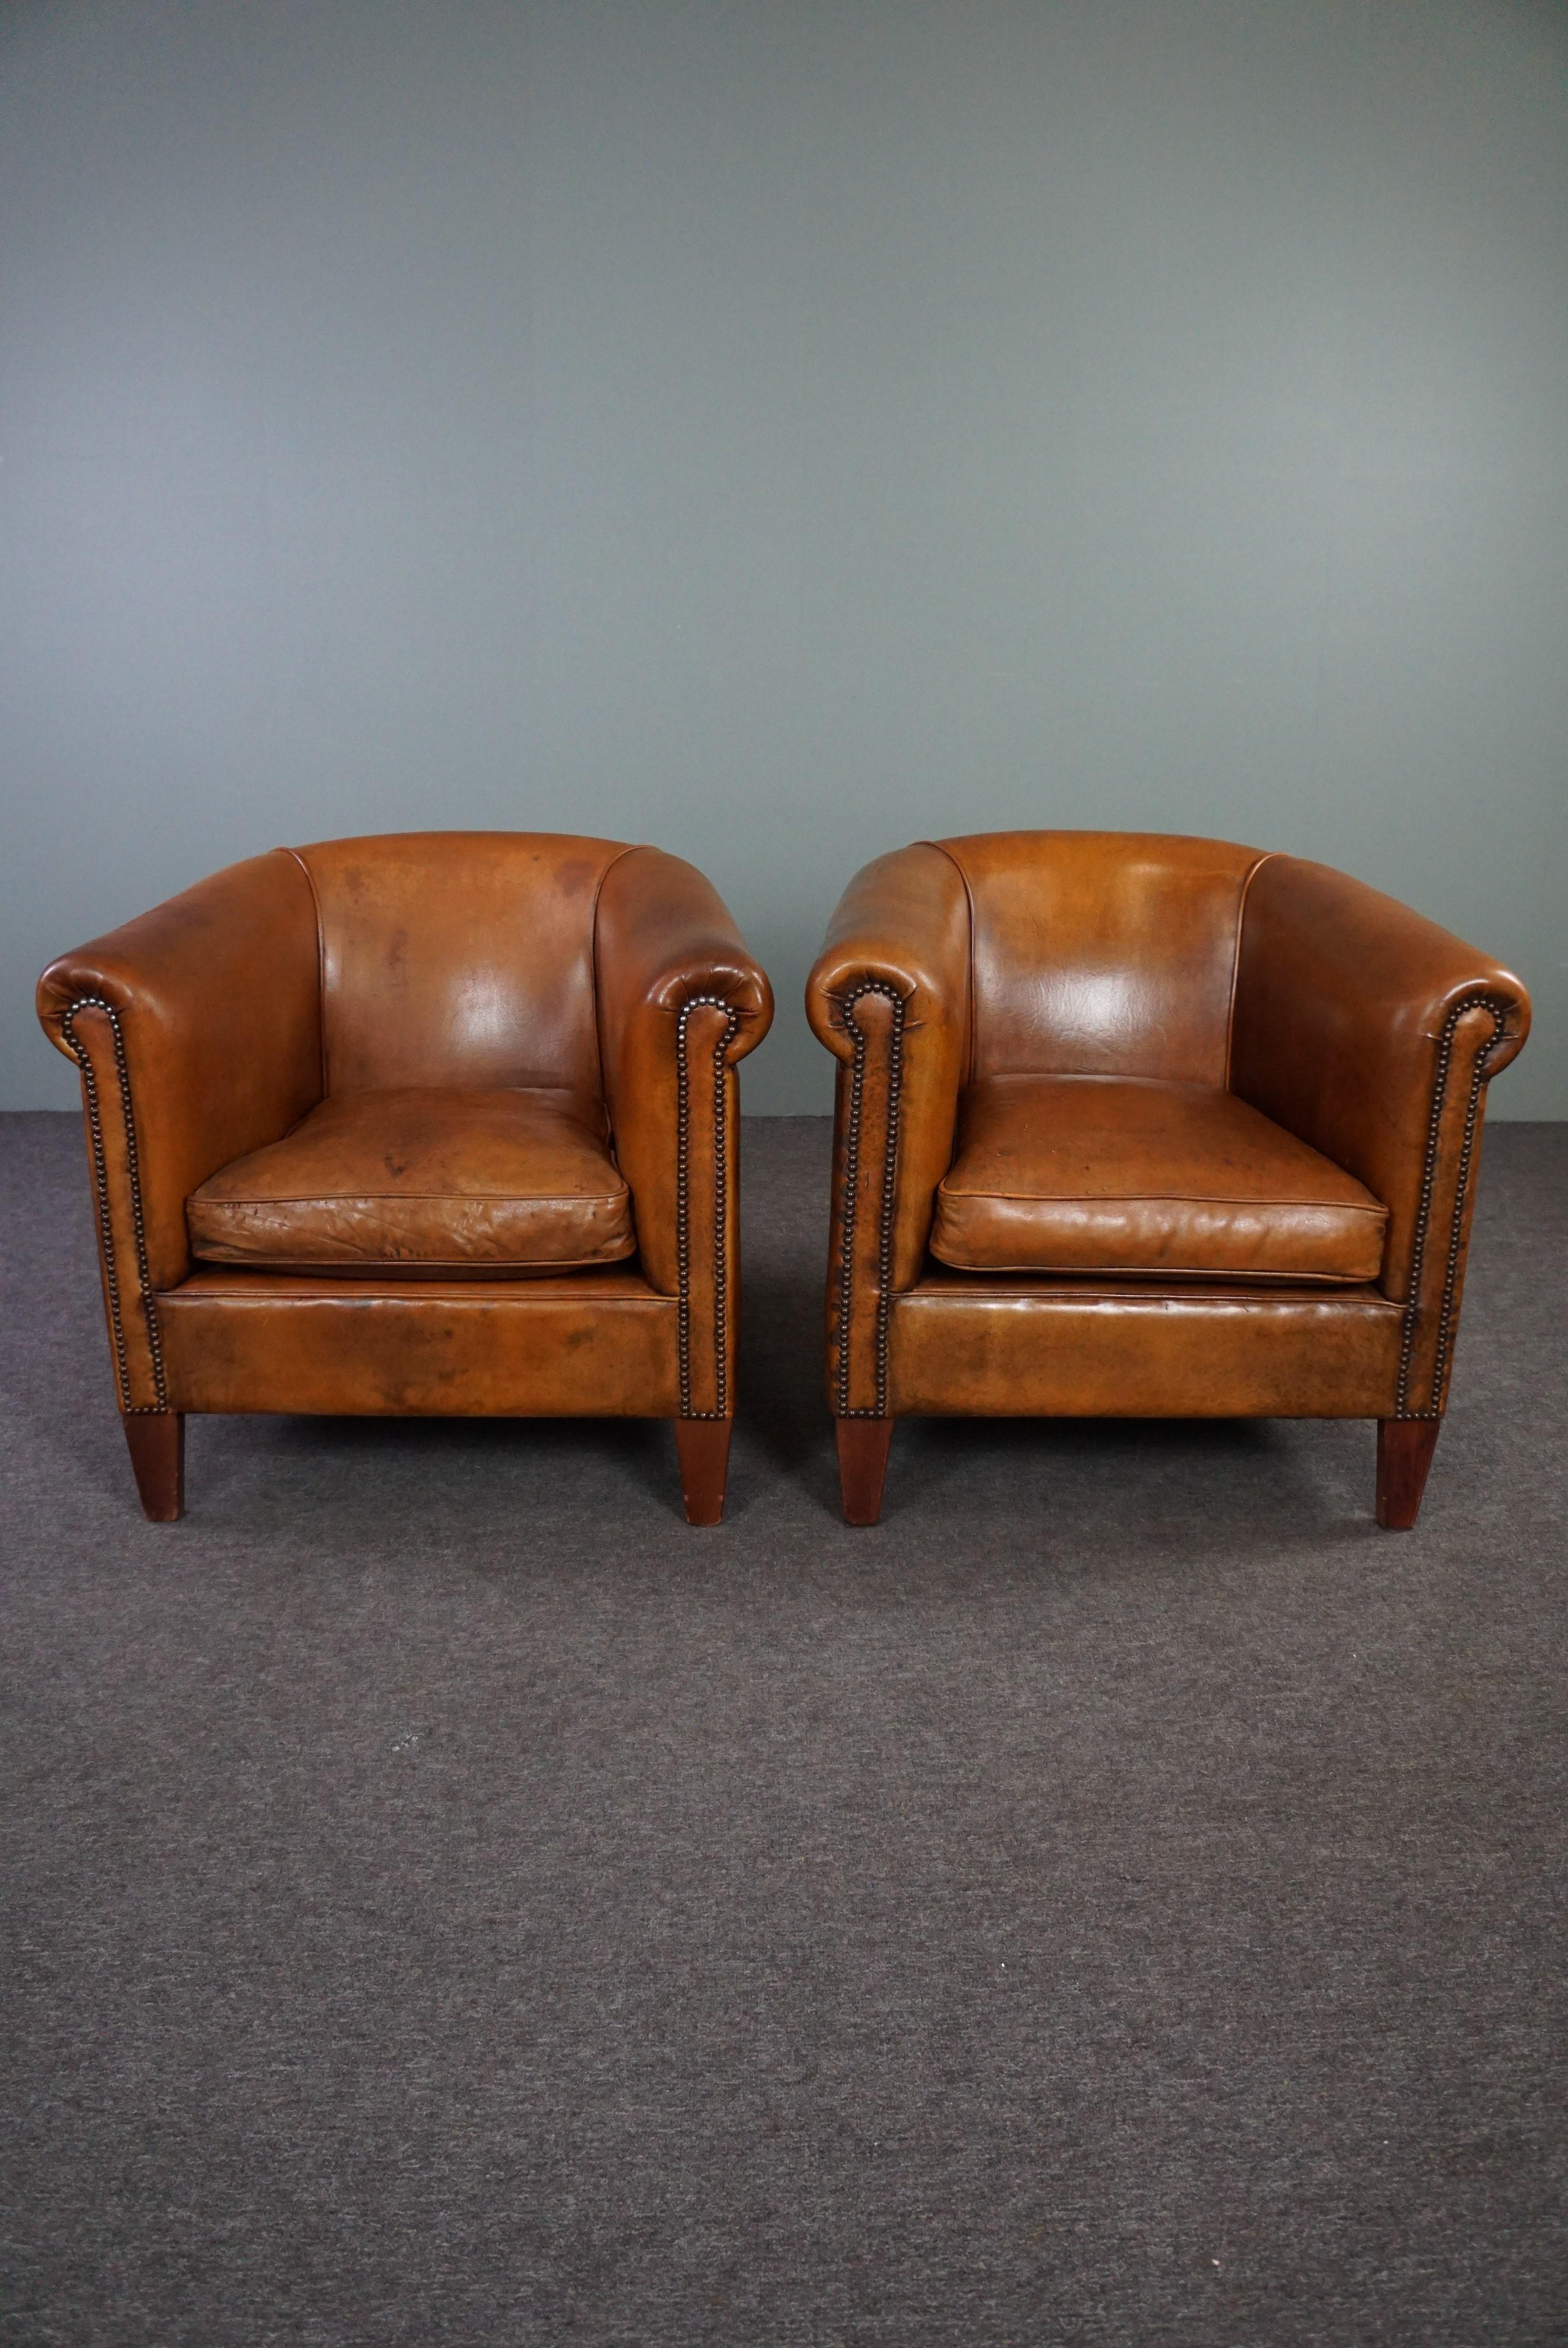 Offered is this shiny set of two sheep leather club chairs with the looks, character and seating comfort.

In our opinion, this set is just right. The finish, the patina and therefore the character and seating comfort make this set a truly fantastic